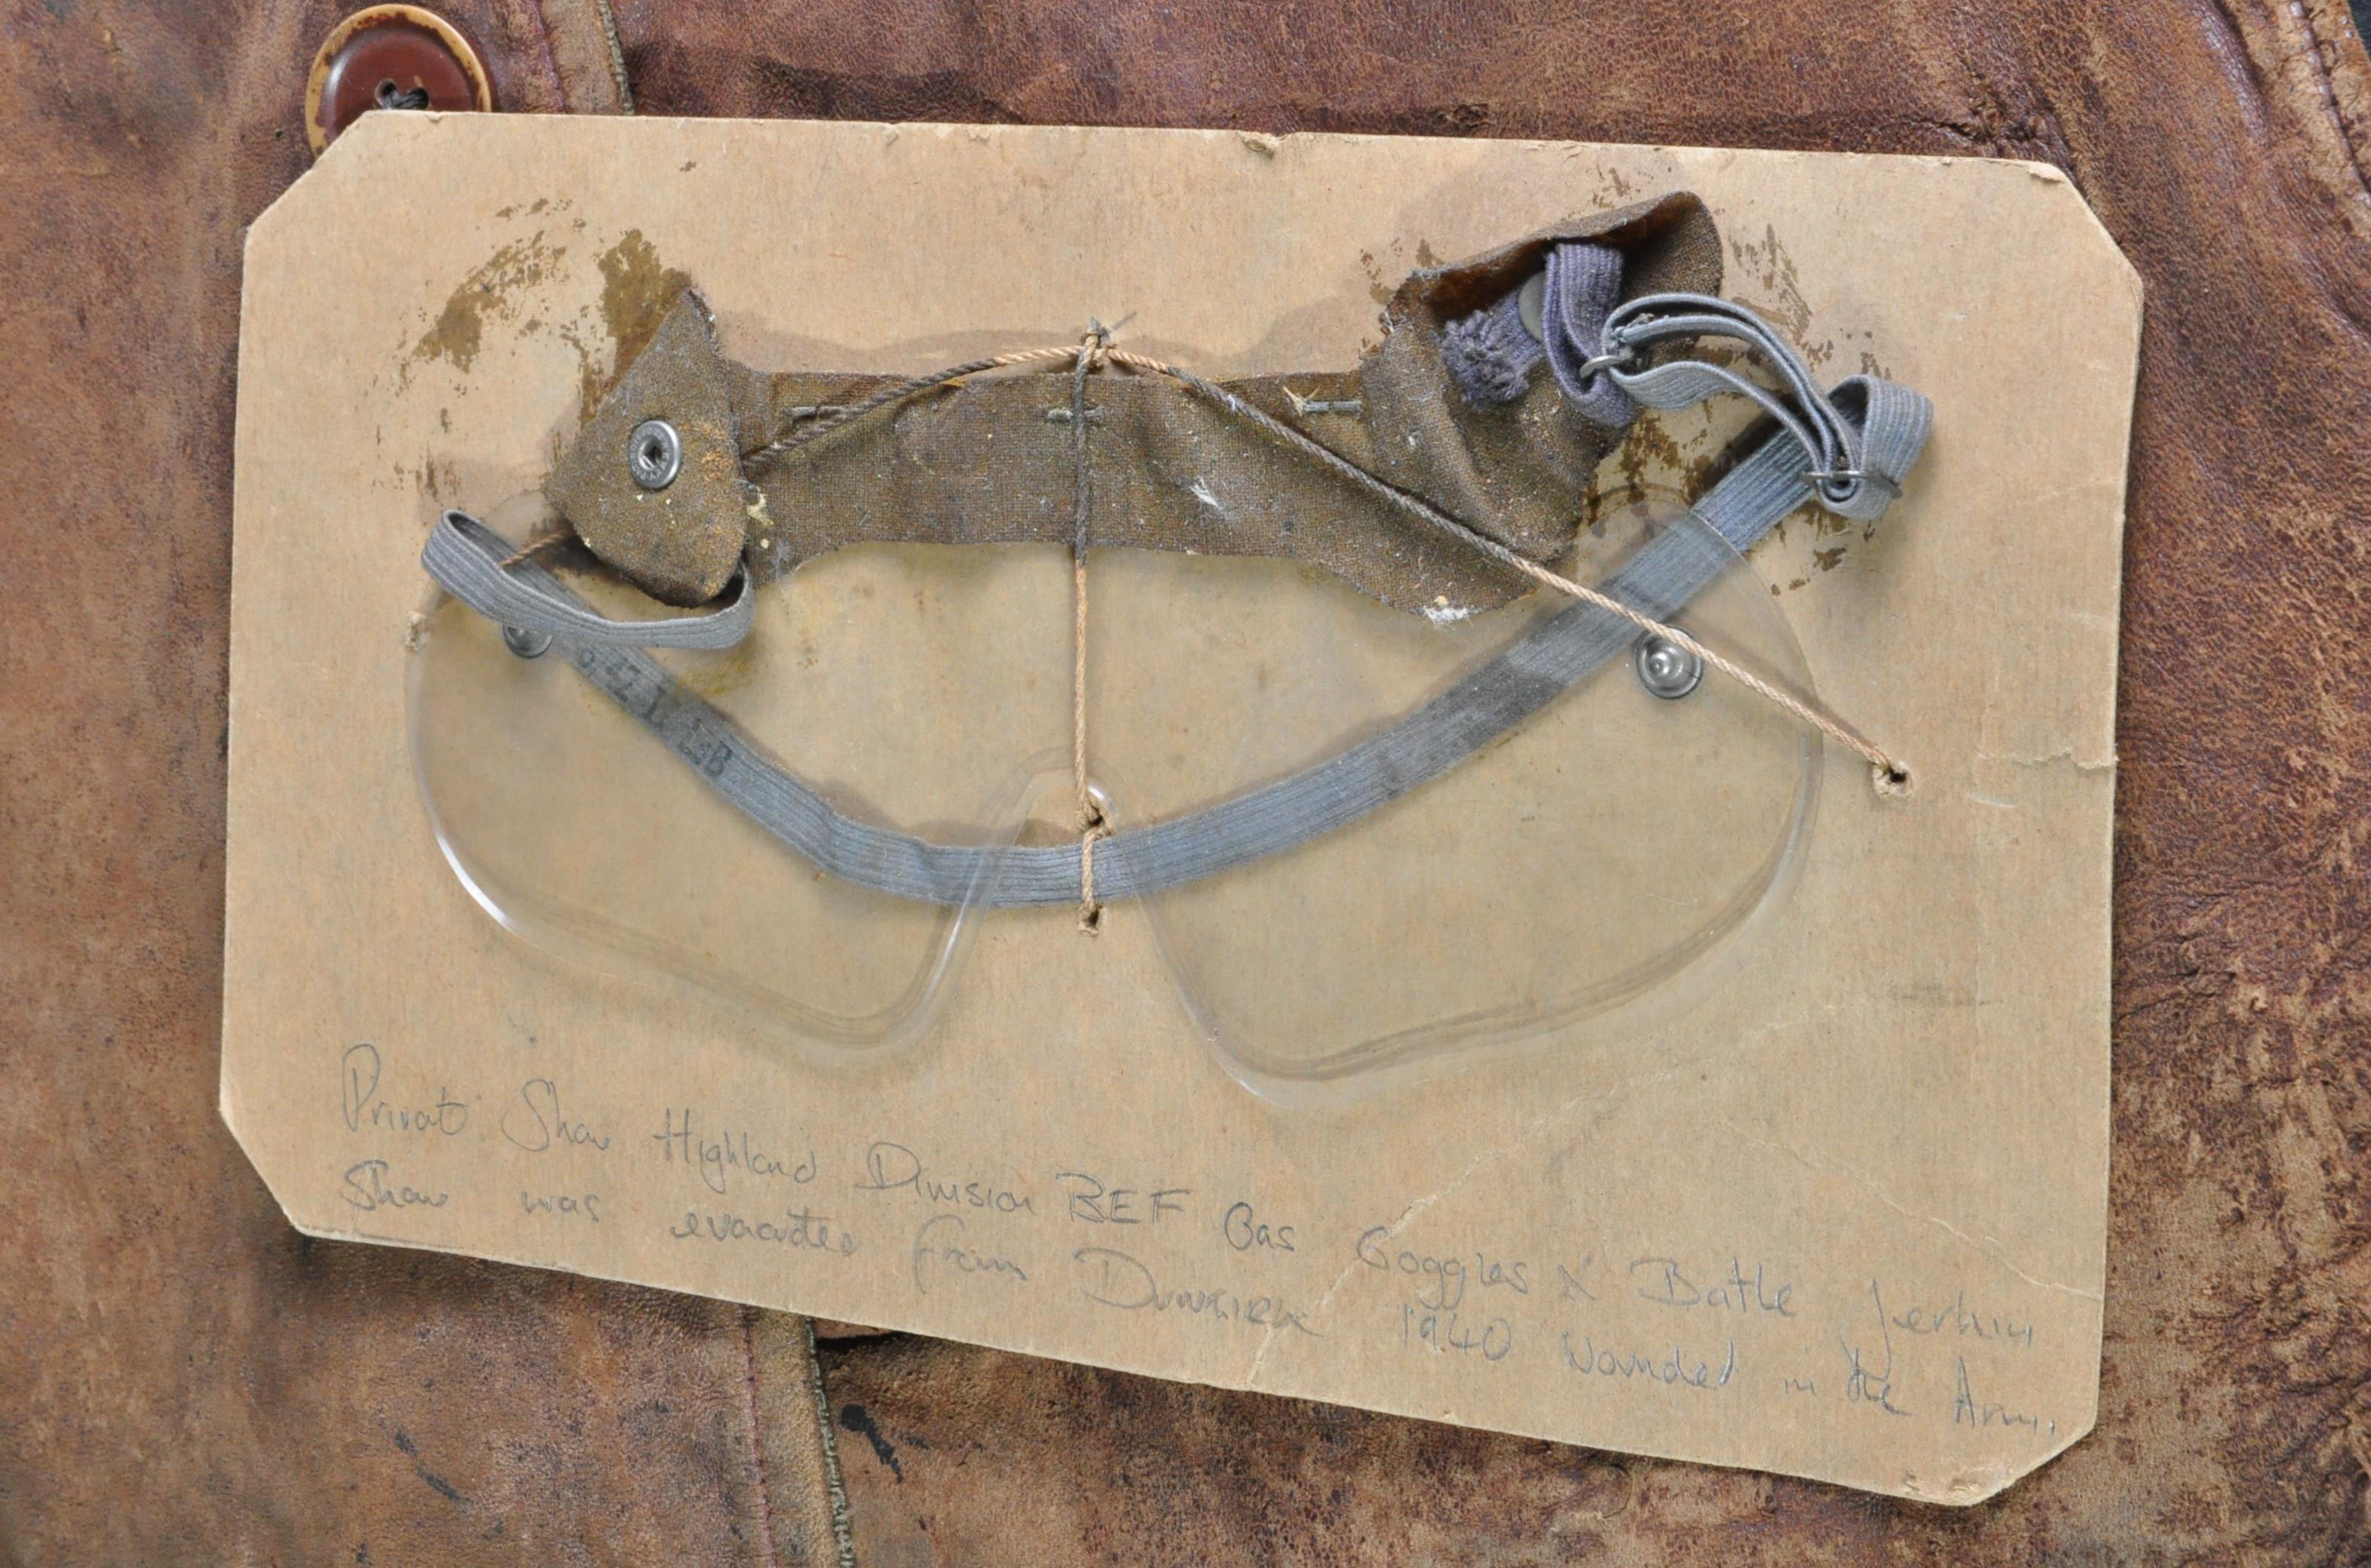 WWII SECOND WORLD WAR SOLDIER'S LEATHER JERKIN & GOGGLES - Image 2 of 5